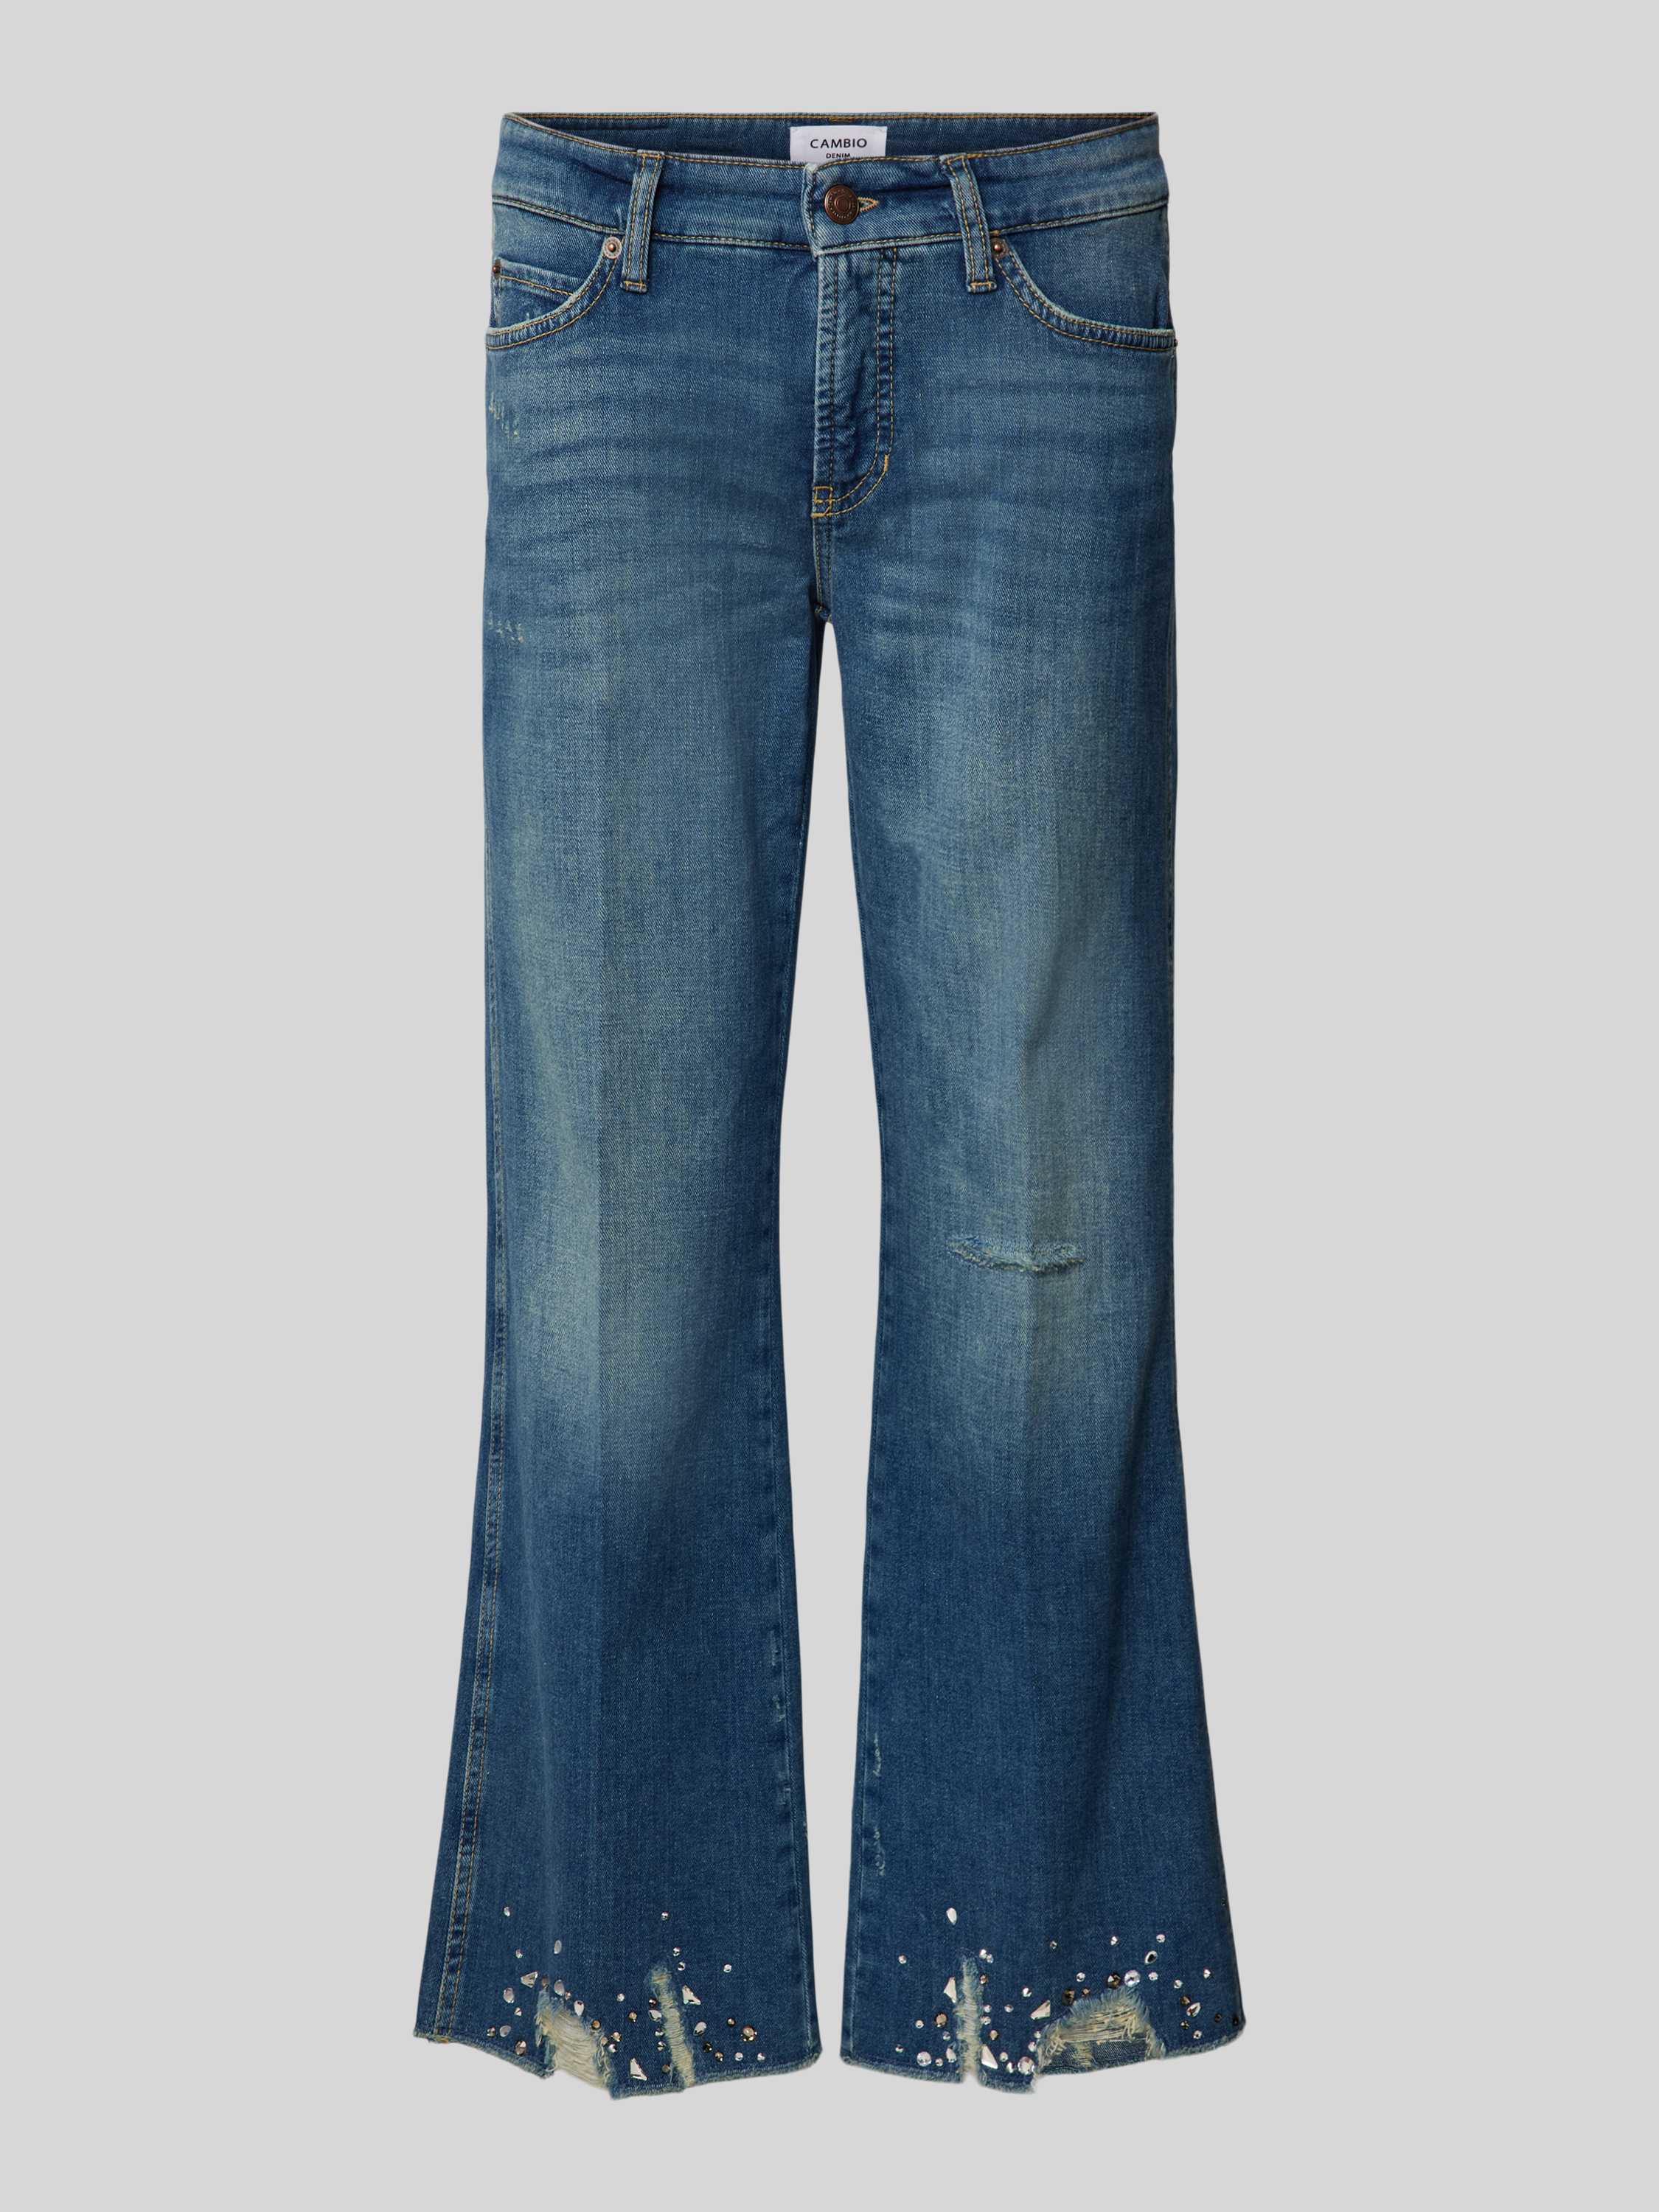 CAMBIO Flared cut jeans in verkorte pasvorm in used-look